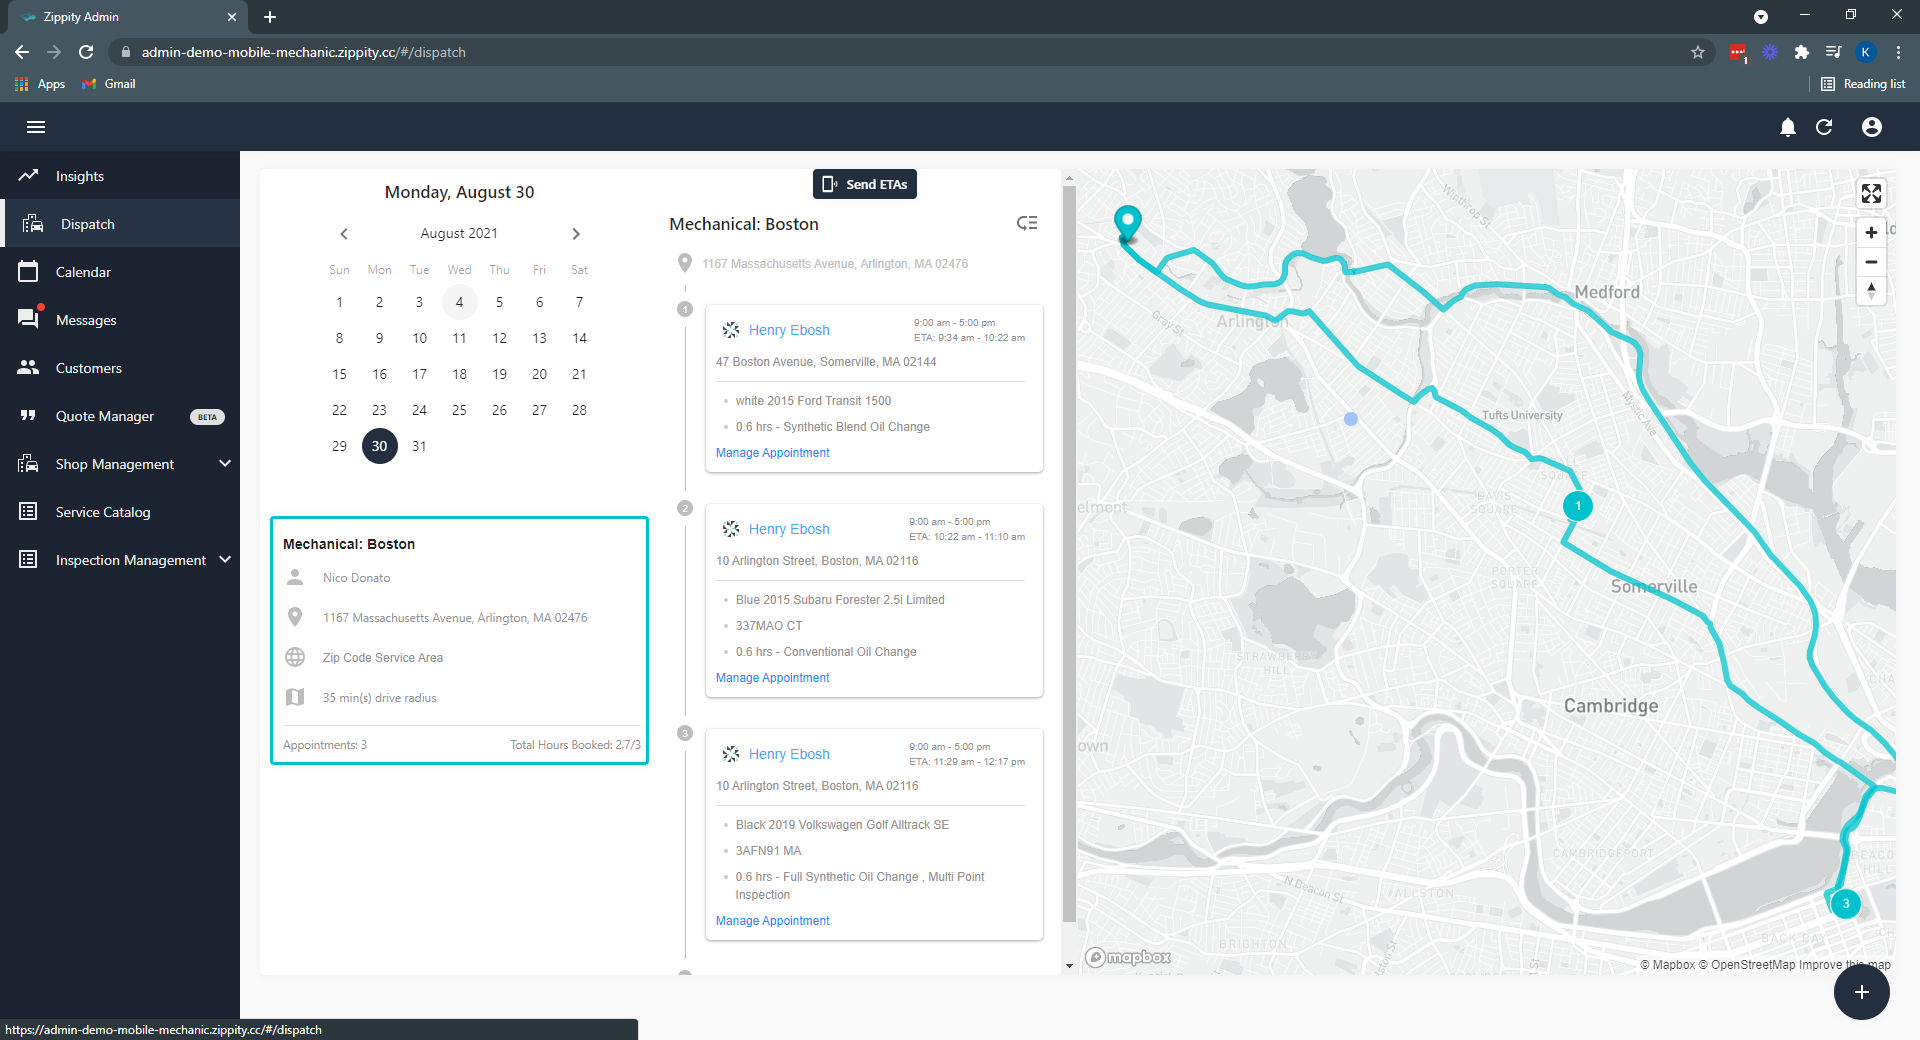 Dispatch software in the administrative app. Automatically route services by proximity to minimize drive times for service vehicles, or manually change route to decrease administrative work for backend users.